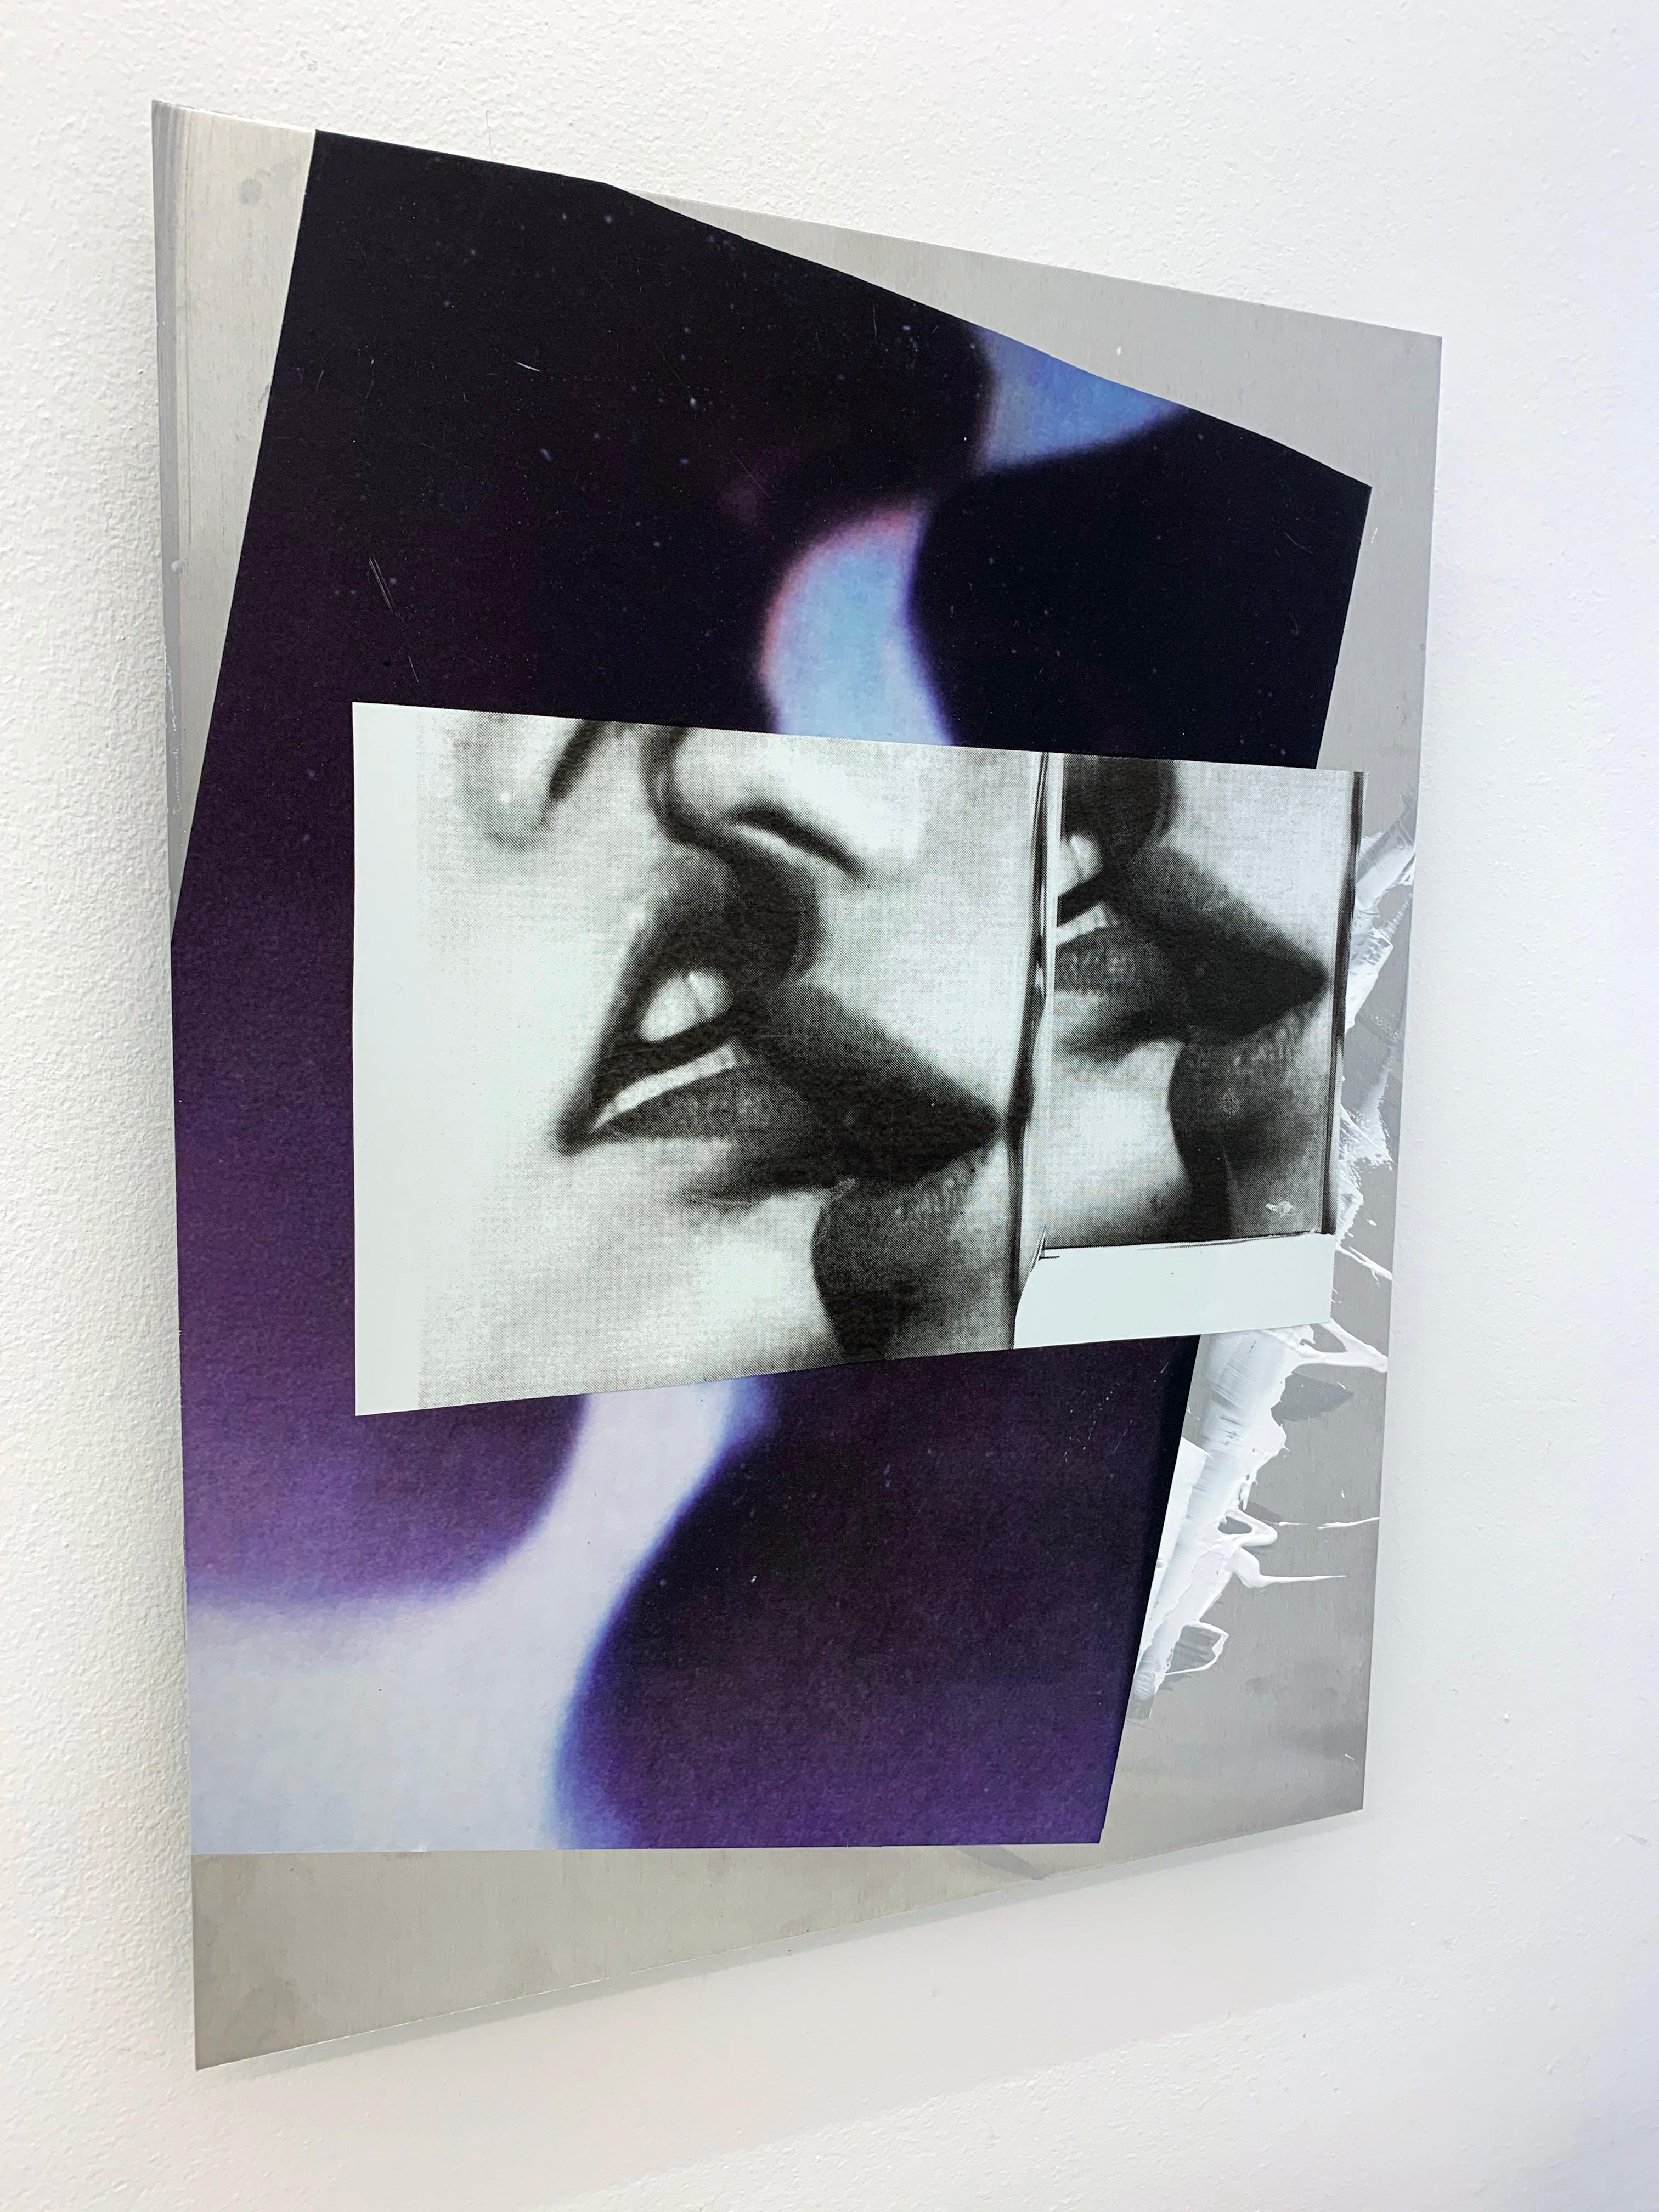 A collage & silkscreen mounted on aluminum of two girls kissing each other. The work is reflective because of the aluminium and that's why it's hard to photograph, but makes a spectacular piece when you see it in real life. 

Hannah Perry’s collages